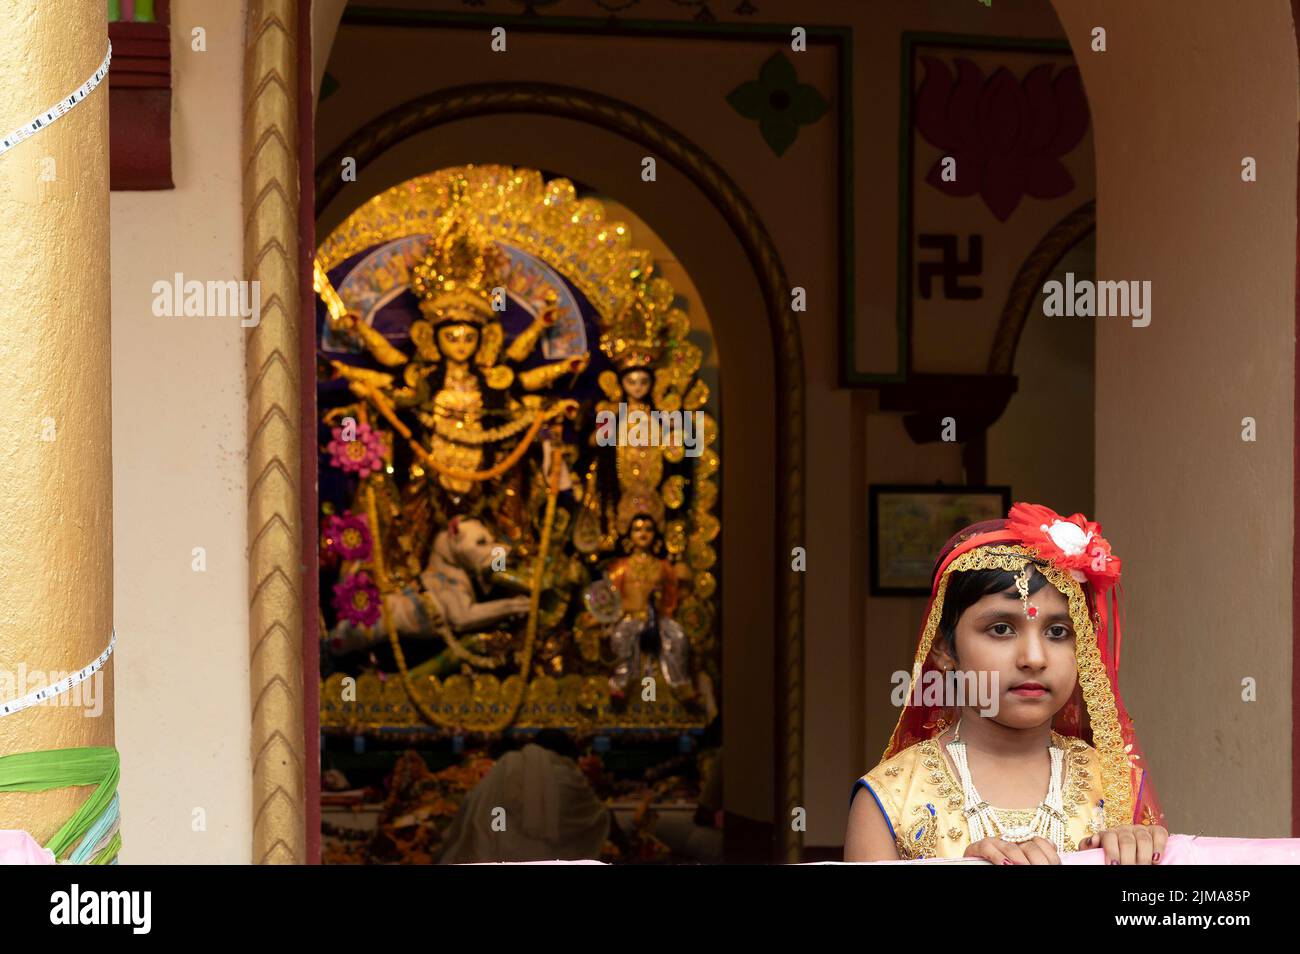 Howrah,India -October 26th,2020 : Bengali girl child in festive dress, smiling and posing with Goddess Durga in background, inside old age home. Stock Photo